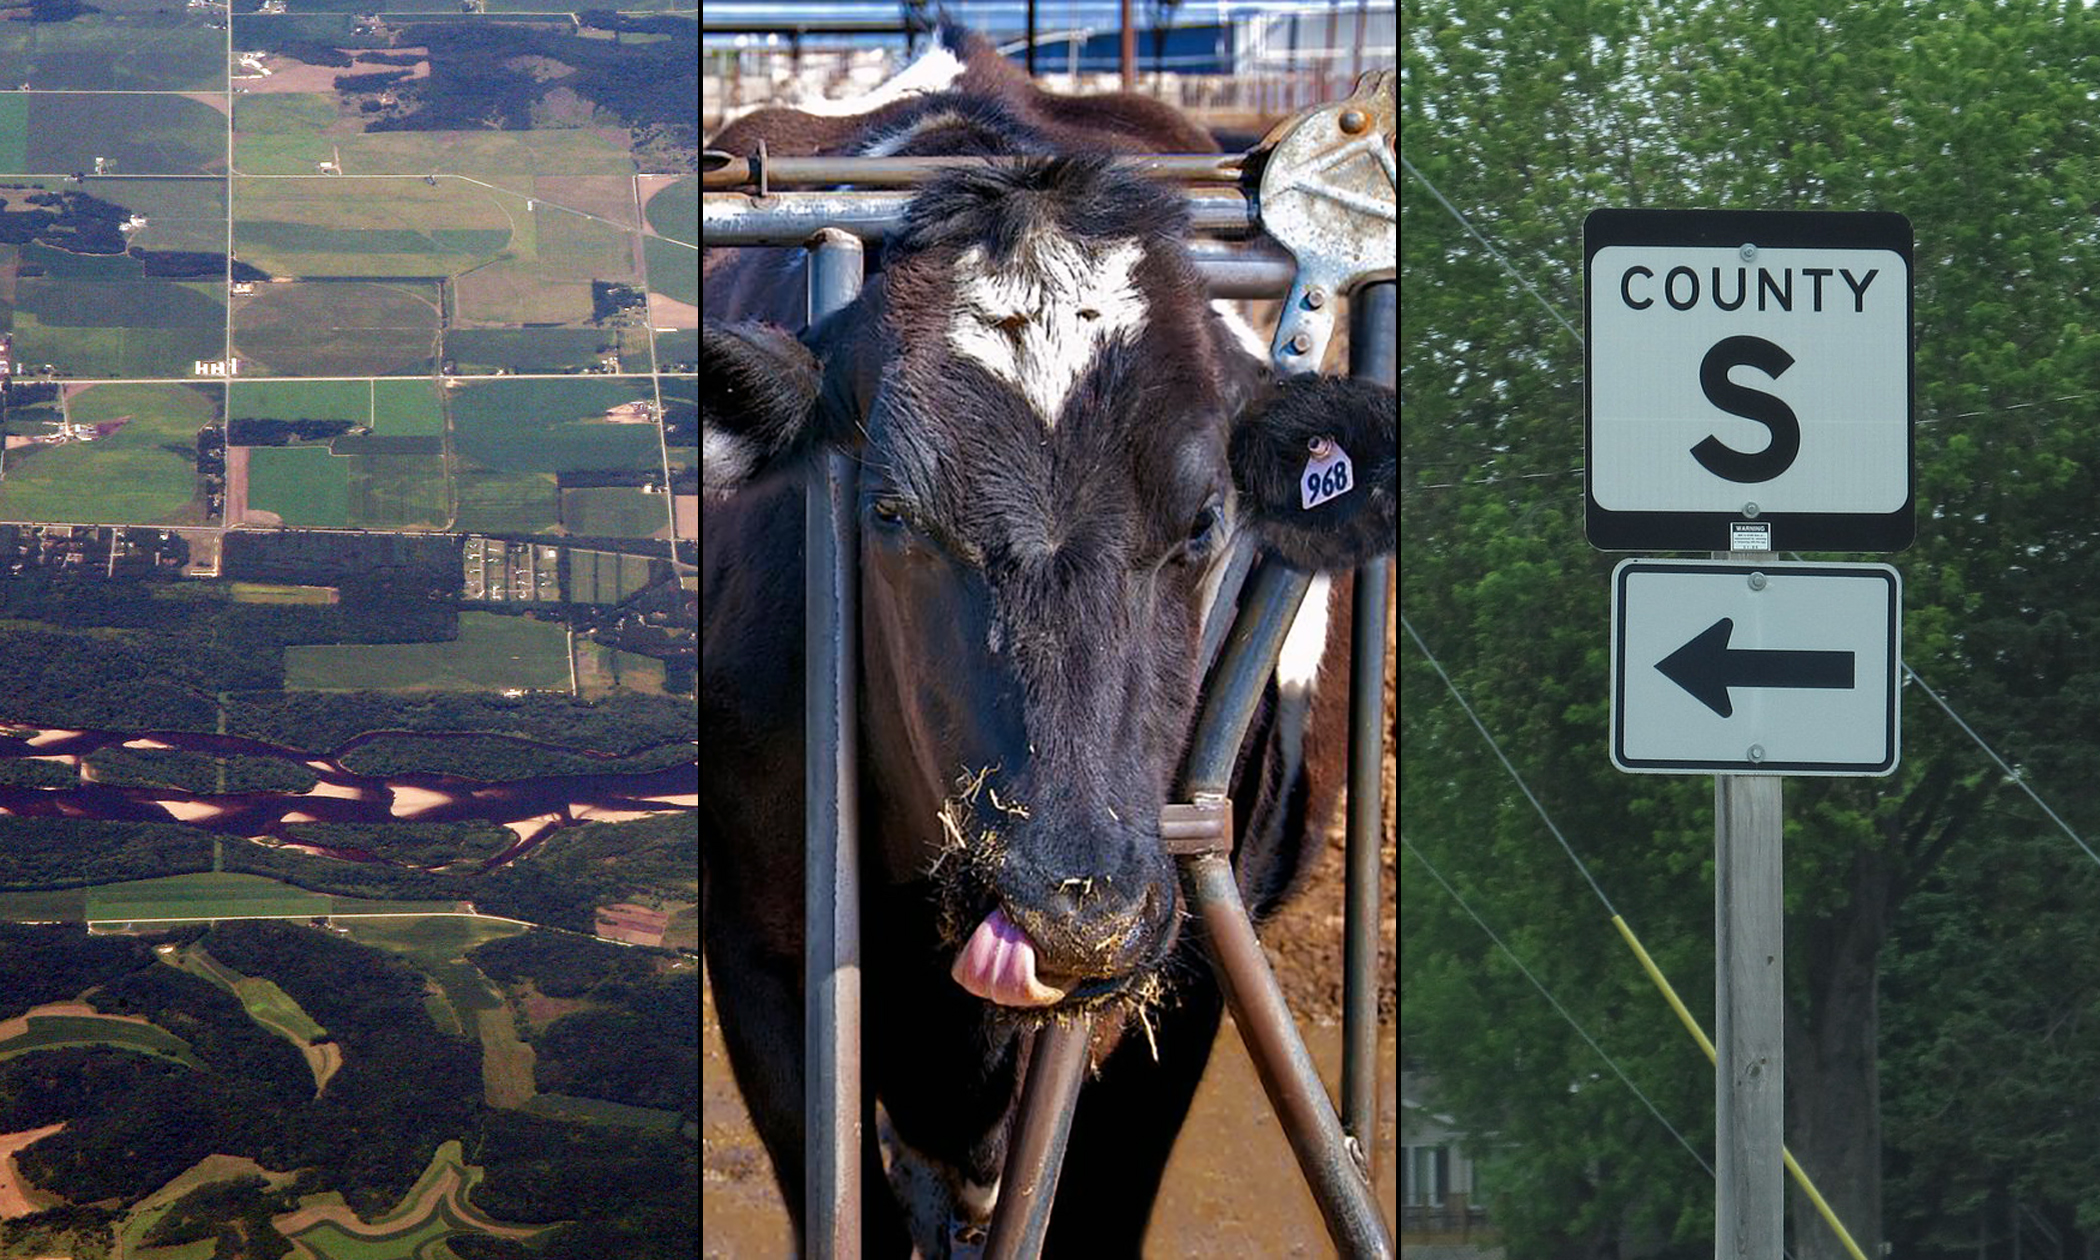 wisconsin aerial view, a dairy cow, a county road sign